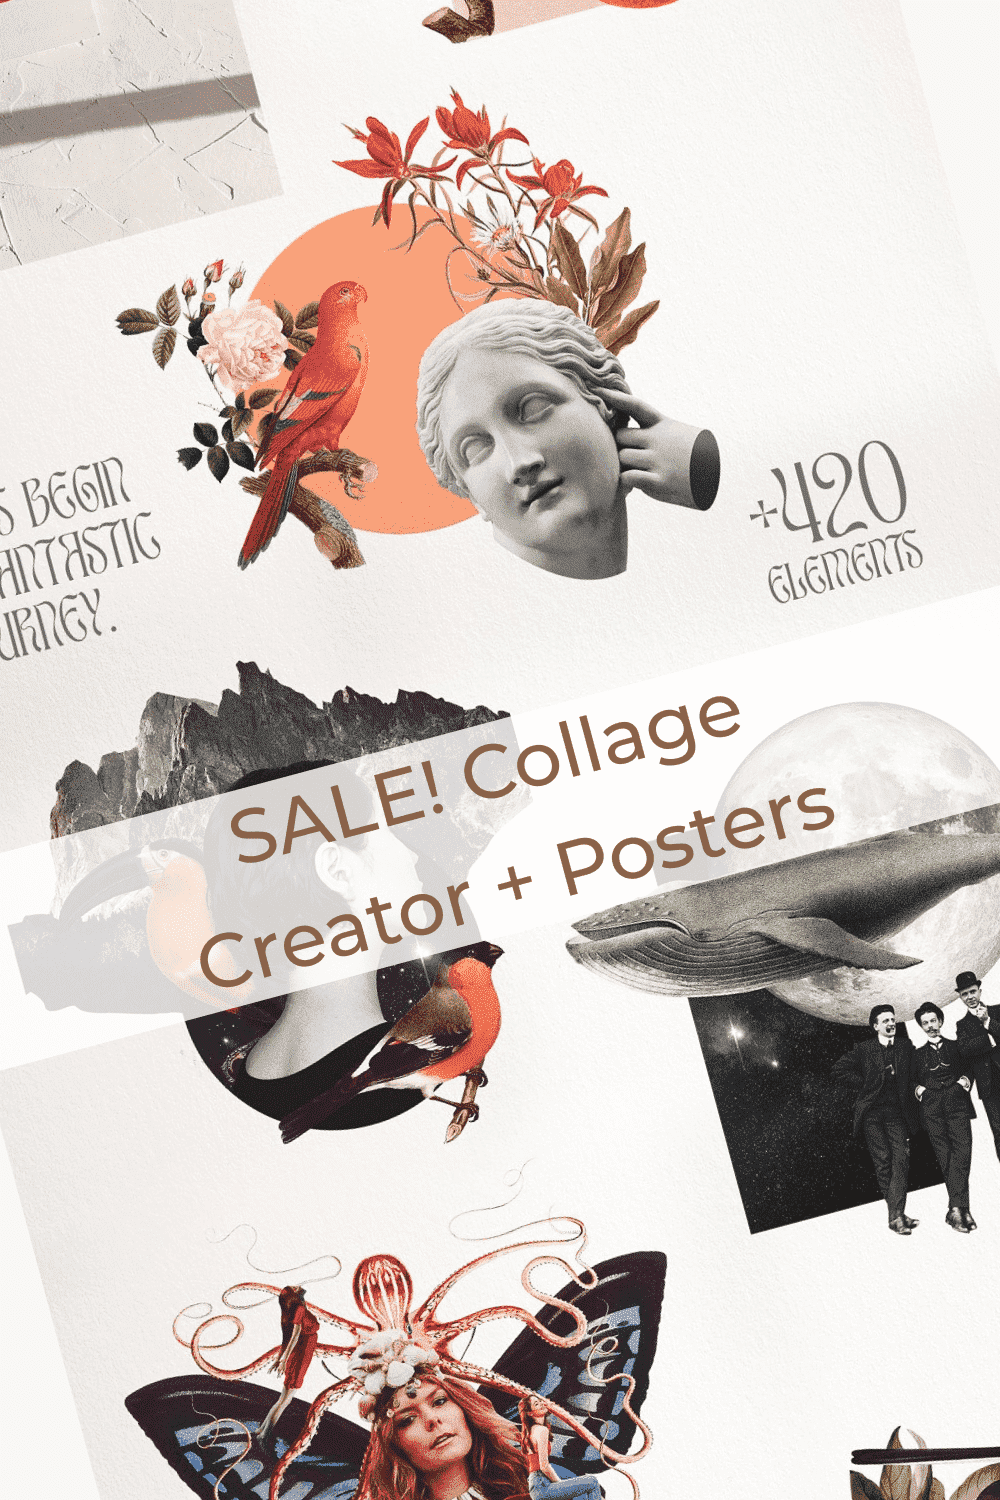 Sale! Collage Creator + Posters - Lets Begin A Fantastic Journey.